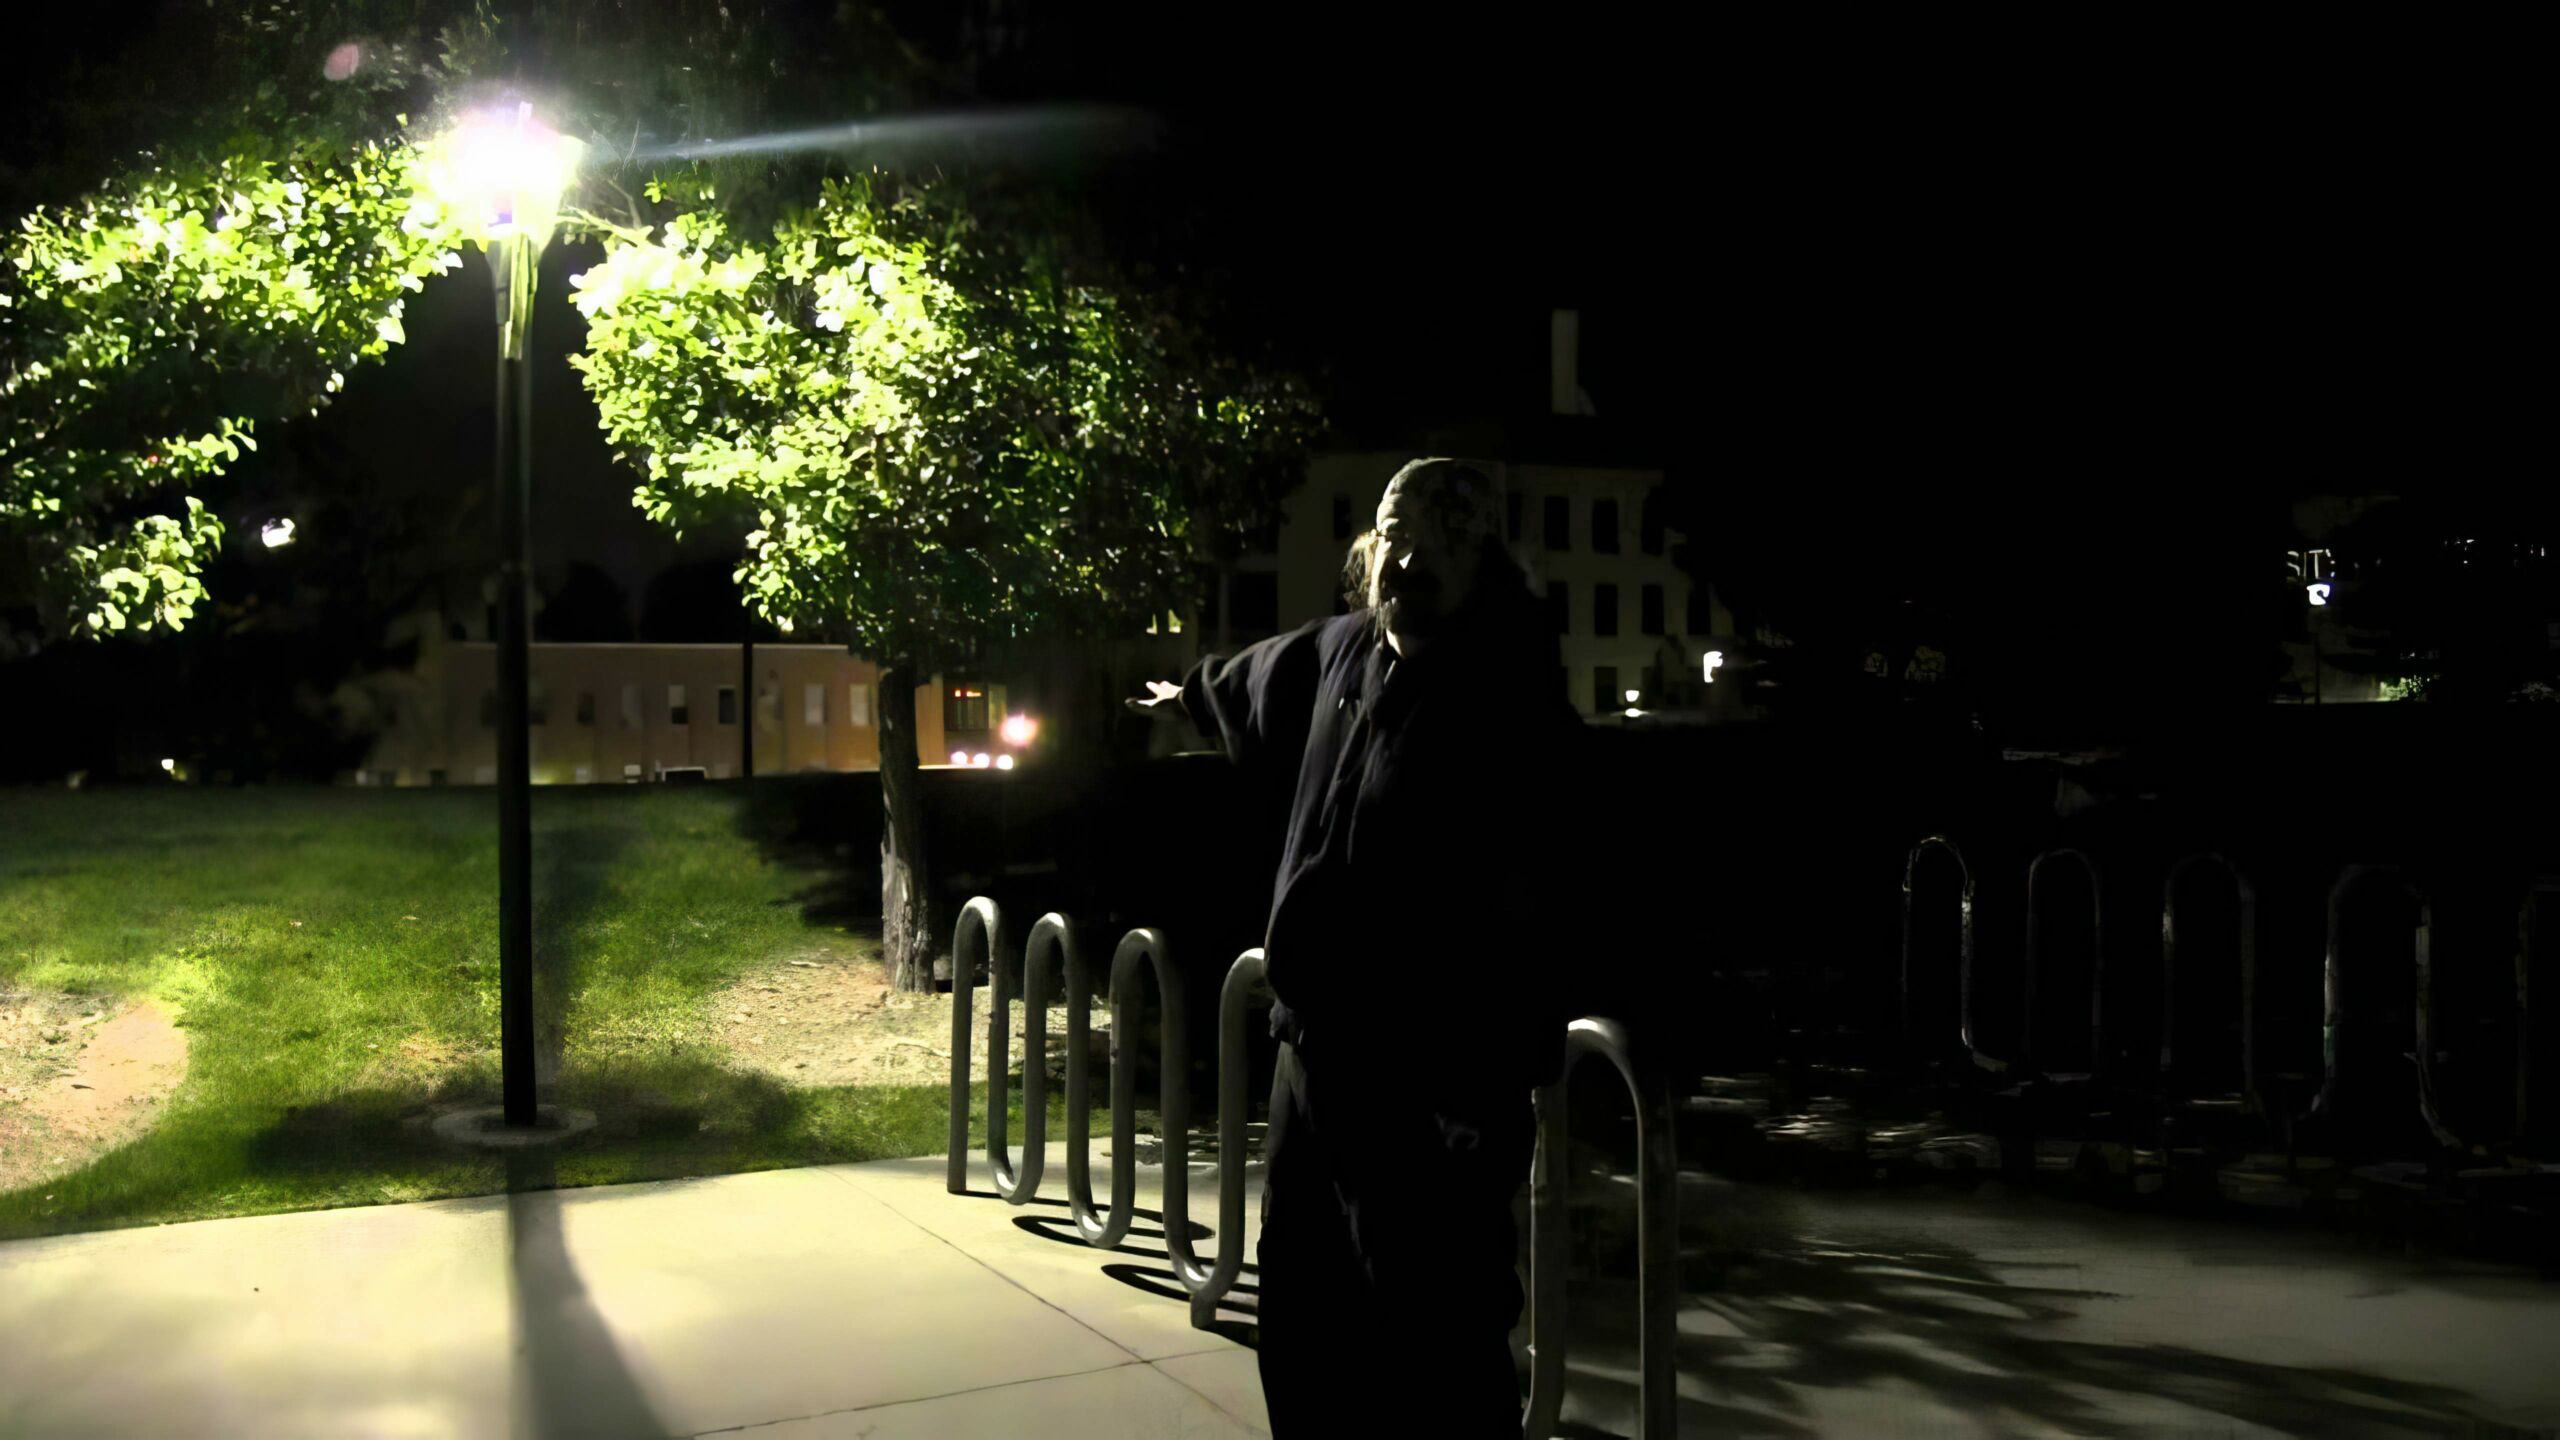 A man at night, nearly hidden in the glare of a park light.